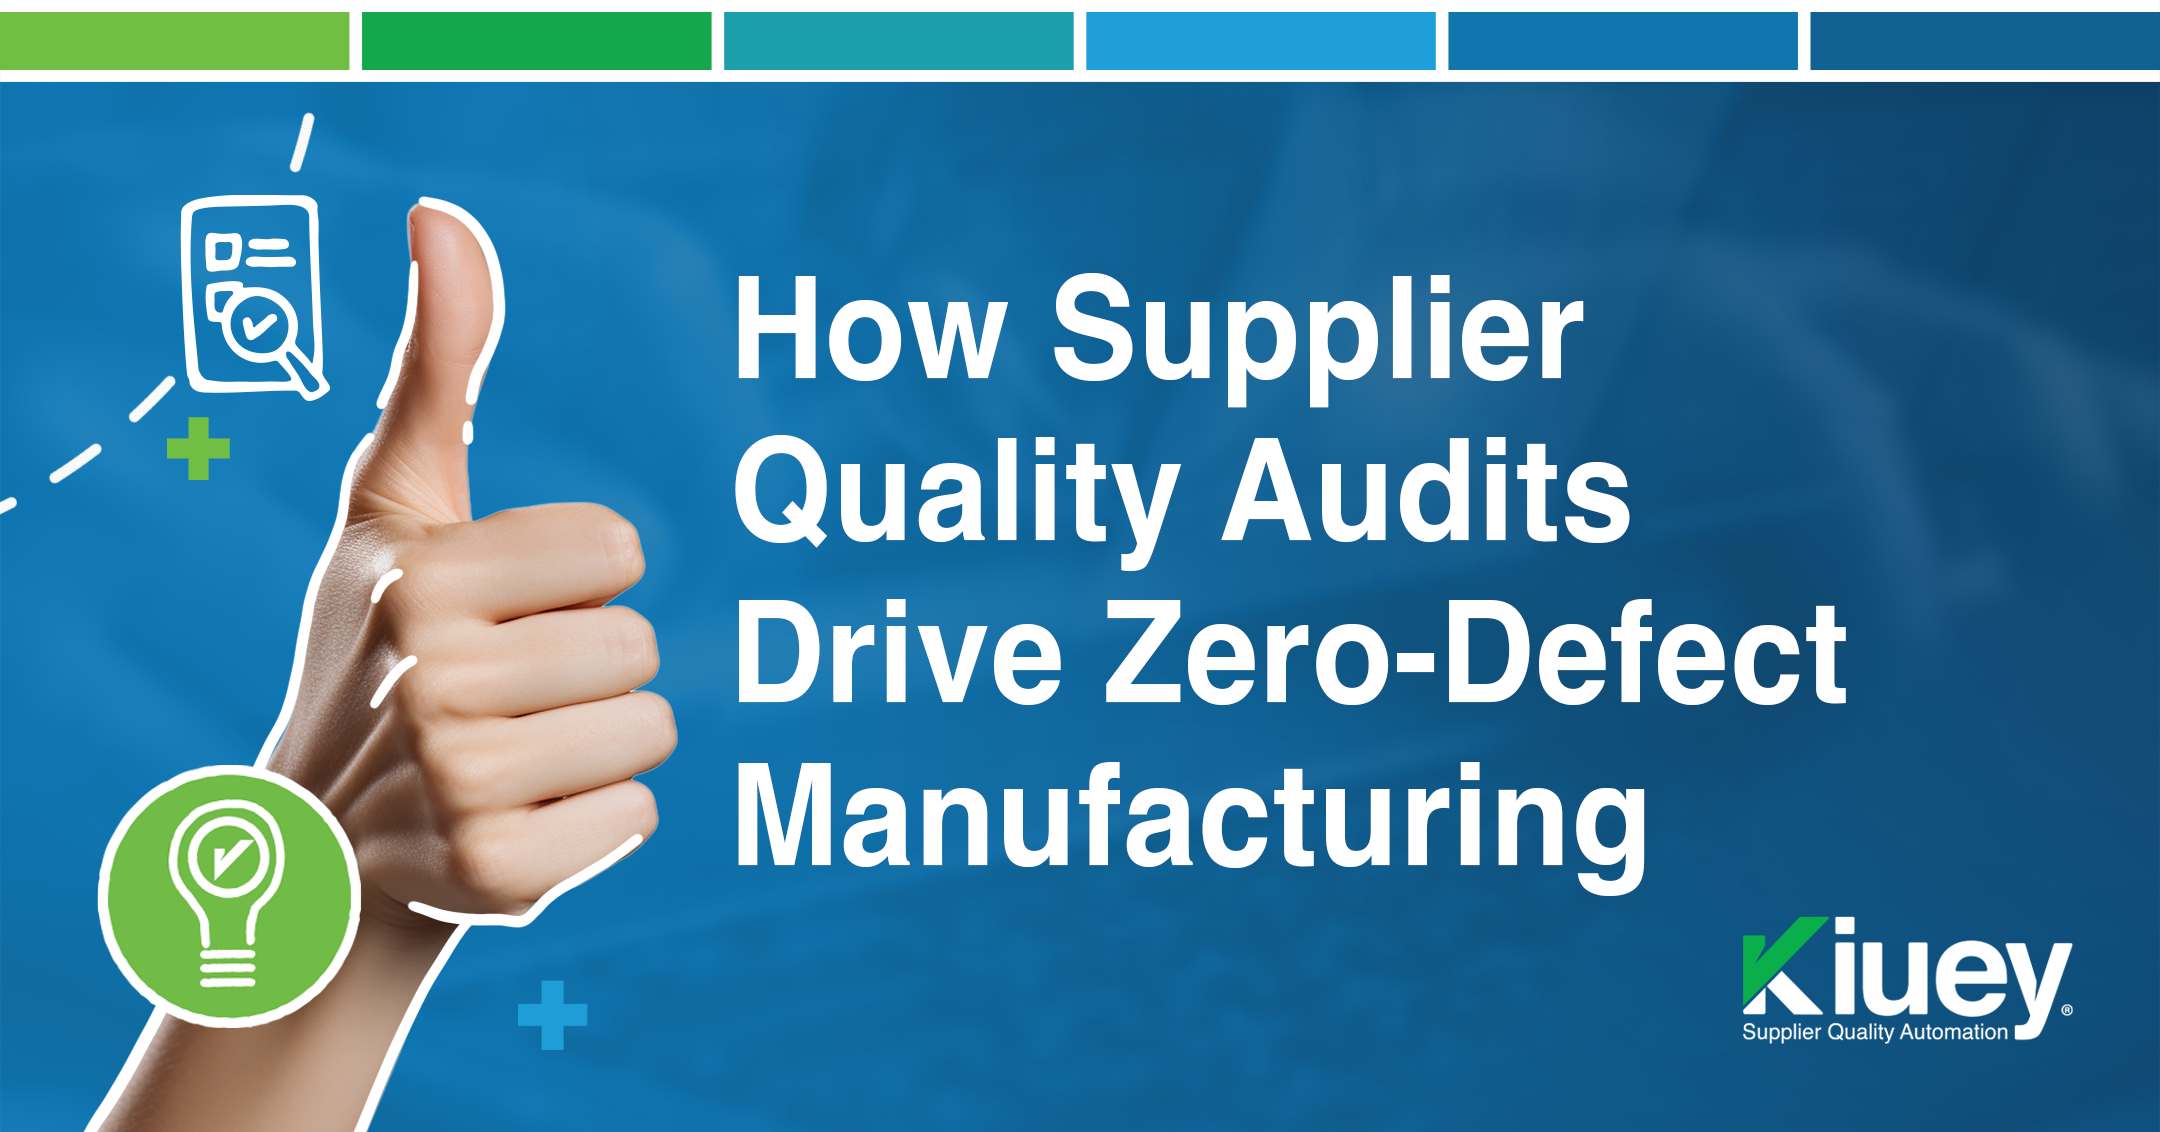 How Supplier Quality Audits Drive Zero Defect Manufacturing